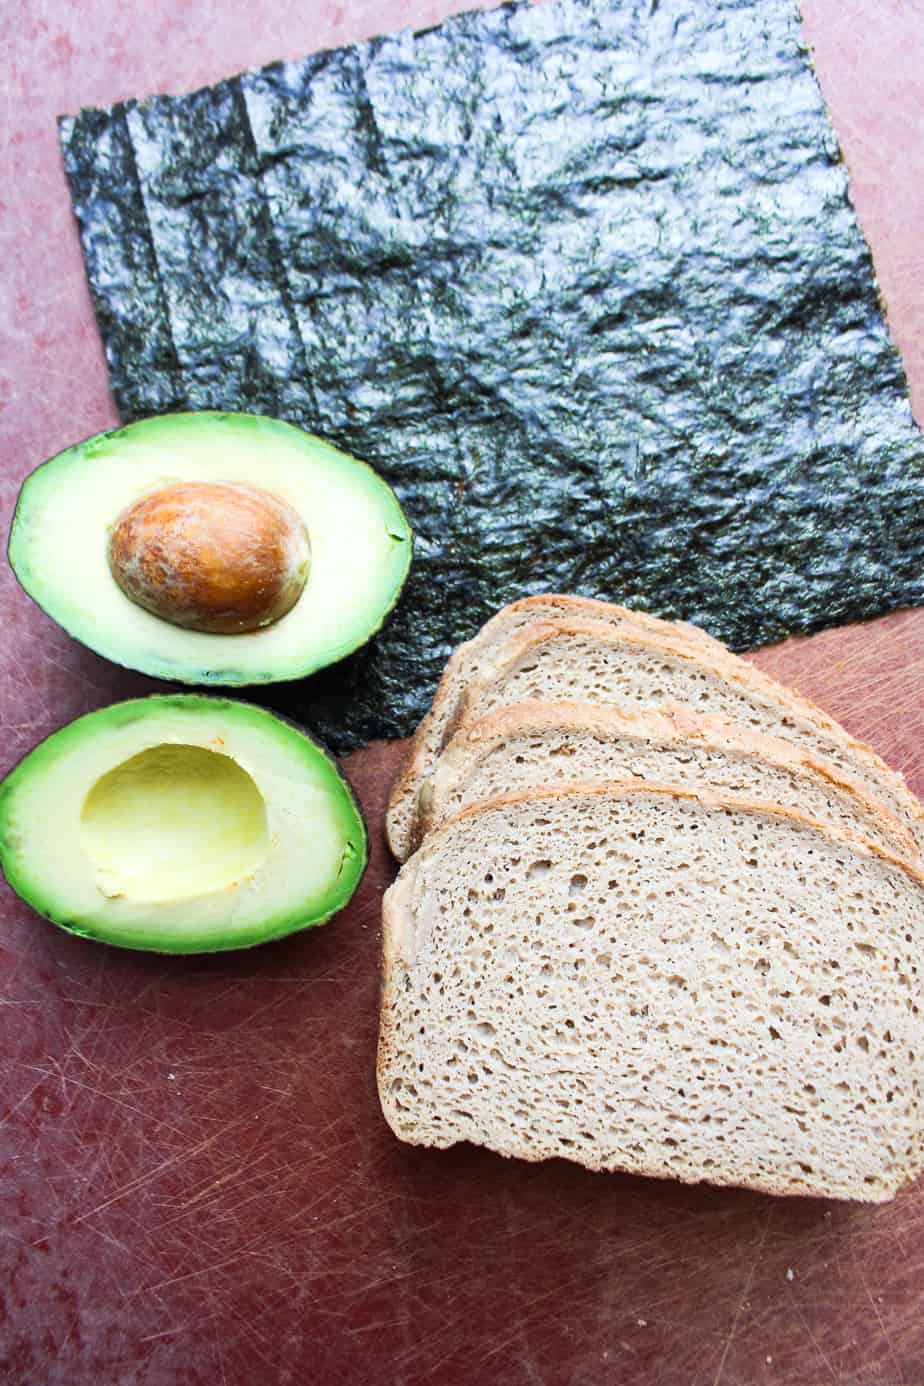 A sheet of nori, an avocado, cut open, and a stack of sliced bread